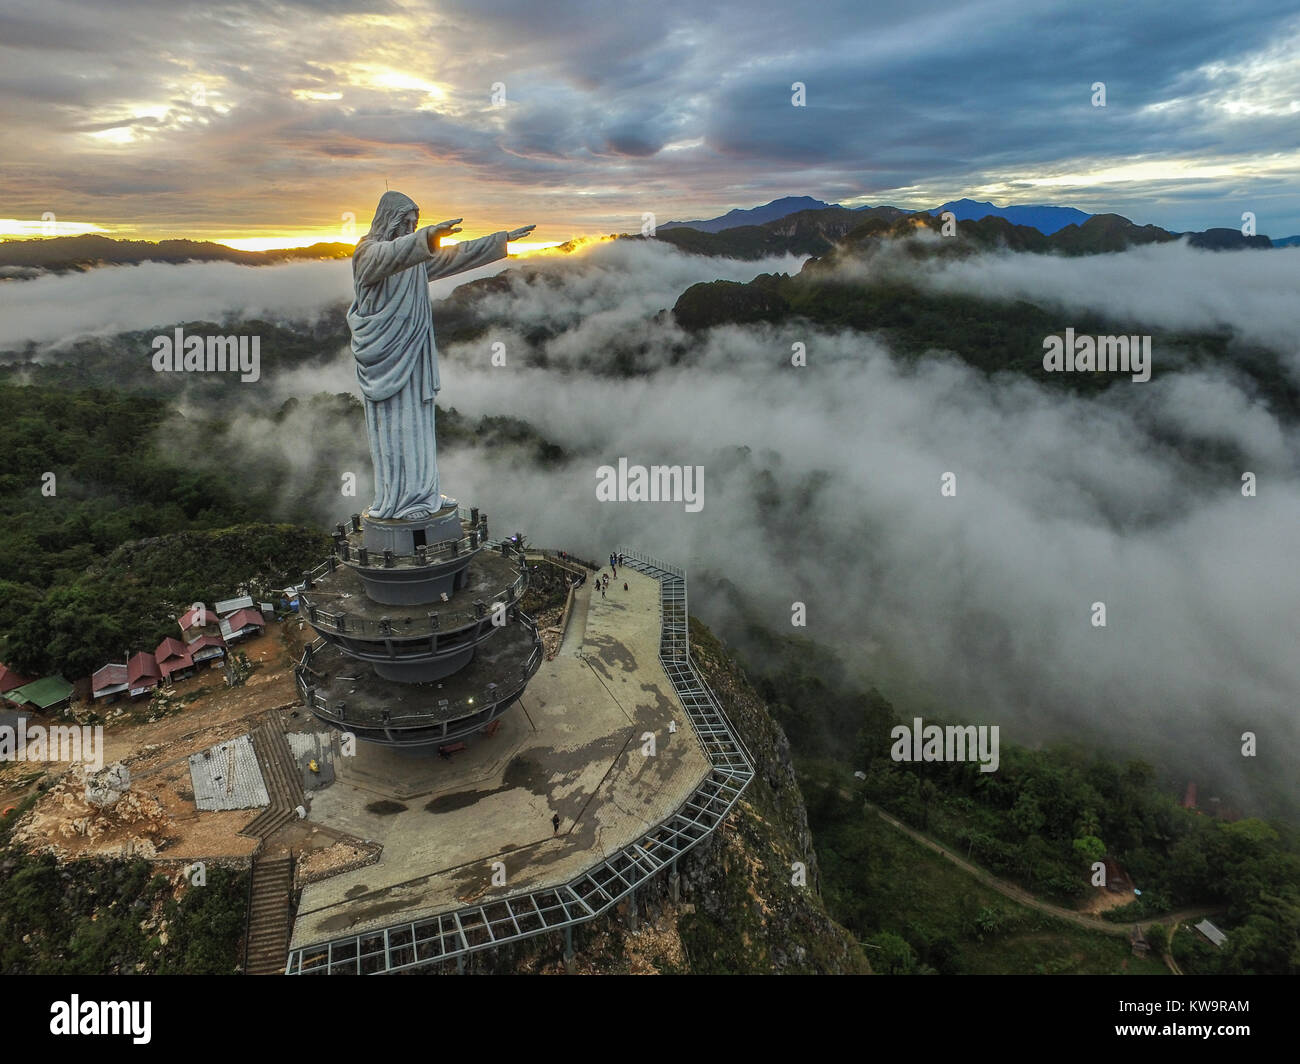 Statue of Jesus Christ at Buntu Burake Hill, Tana Toraja - South Sulawesi, Indonesia. The cloud appear every morning covering the city of Makale. Stock Photo